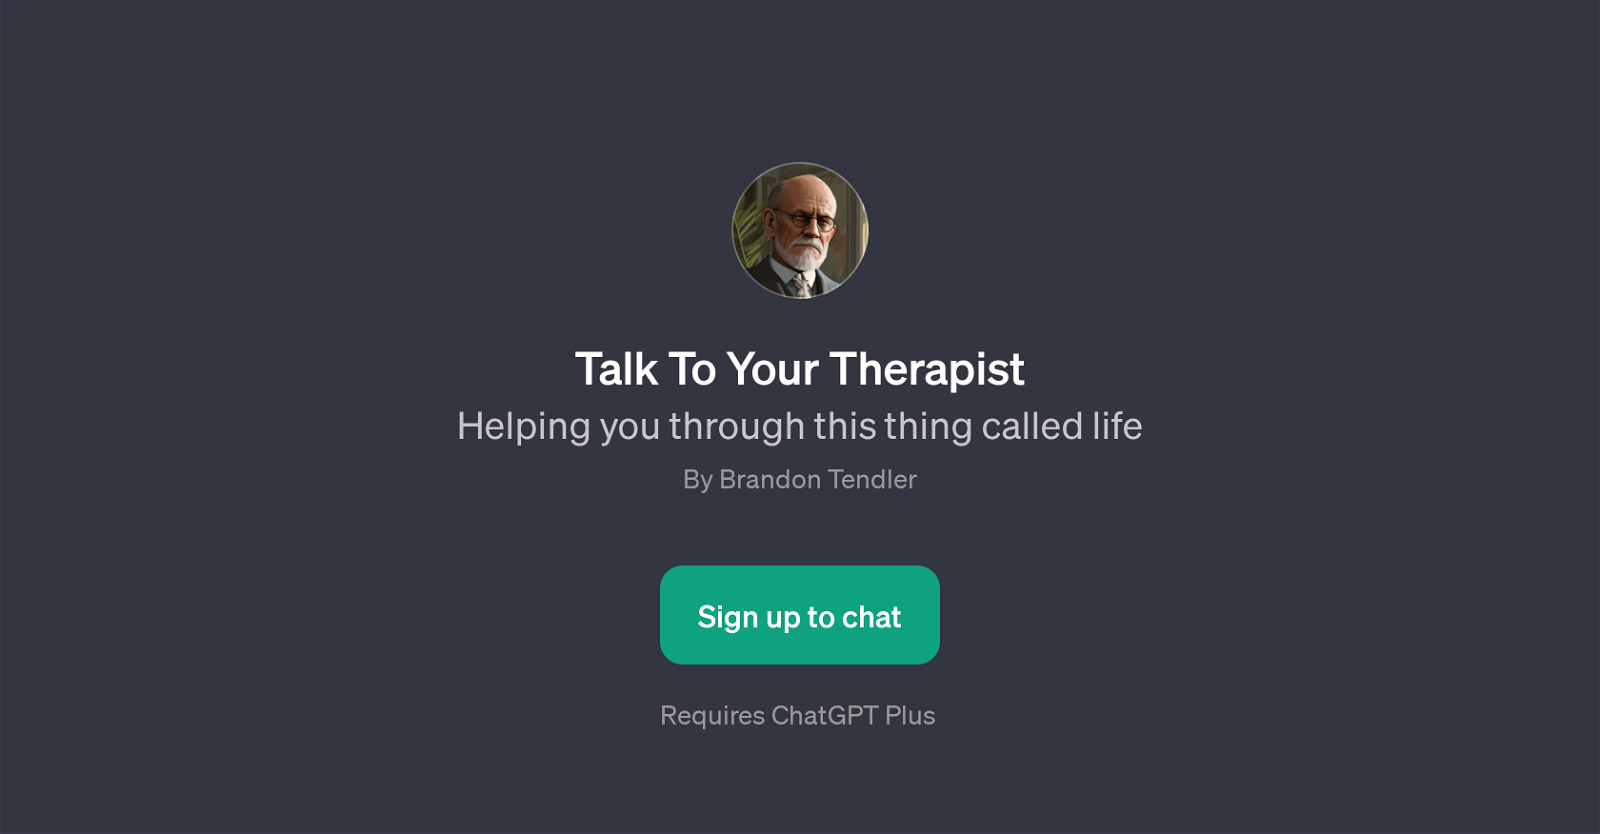 Talk To Your Therapist website